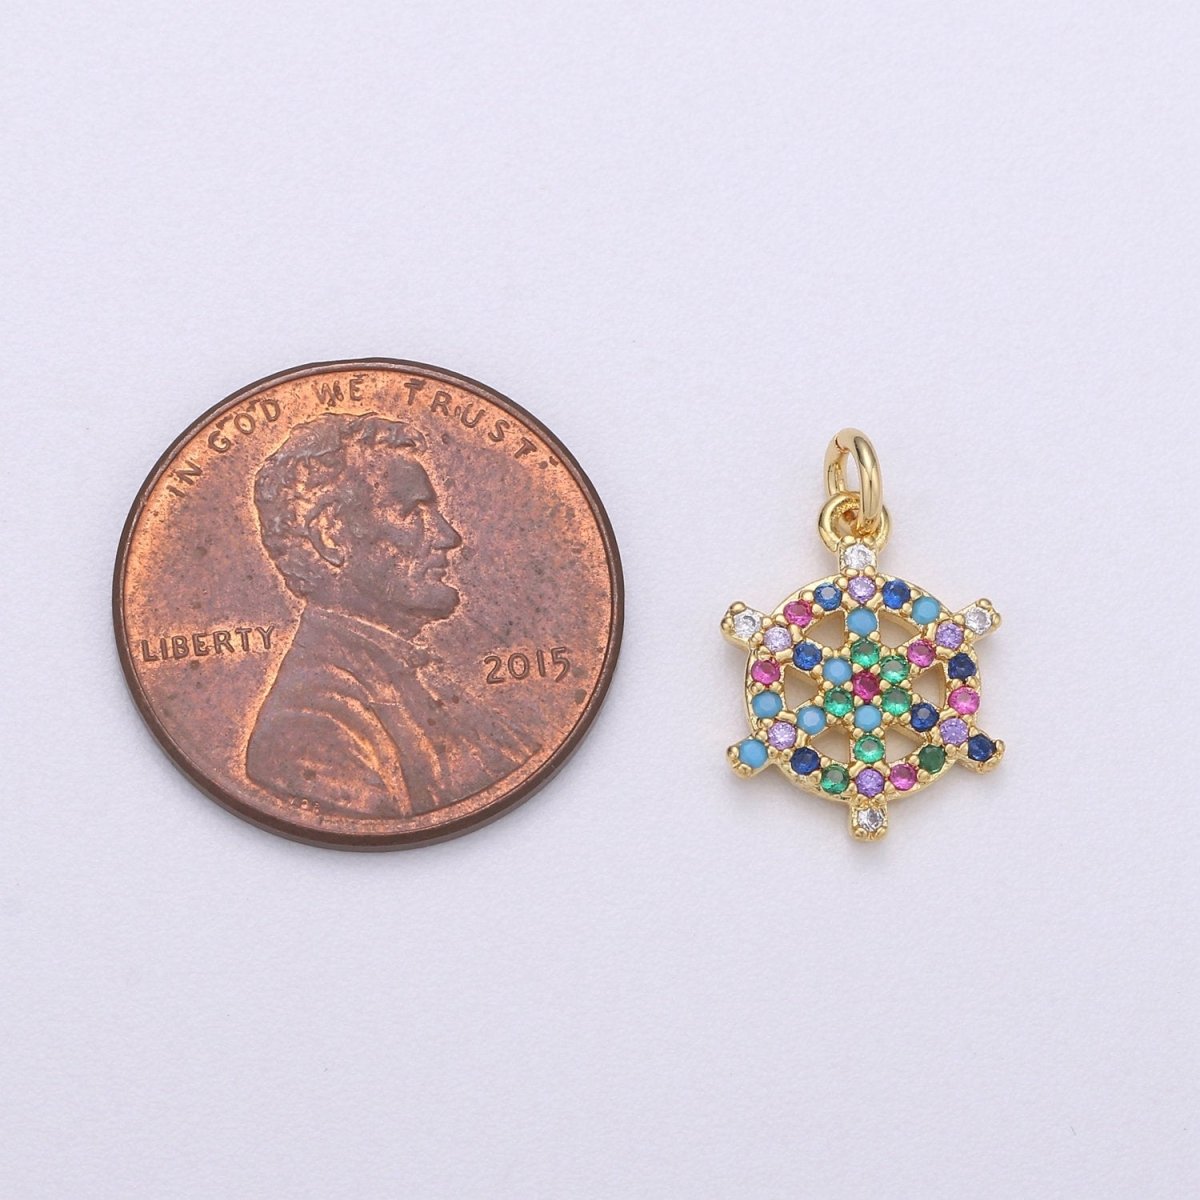 14k Gold Filled Nautical Charm Micro Pave Sailor Charm, Rainbow Cubic Charms, CZ Gold Colorful Charm, Dainty Minimalist Jewelry SupplyC-554 - DLUXCA